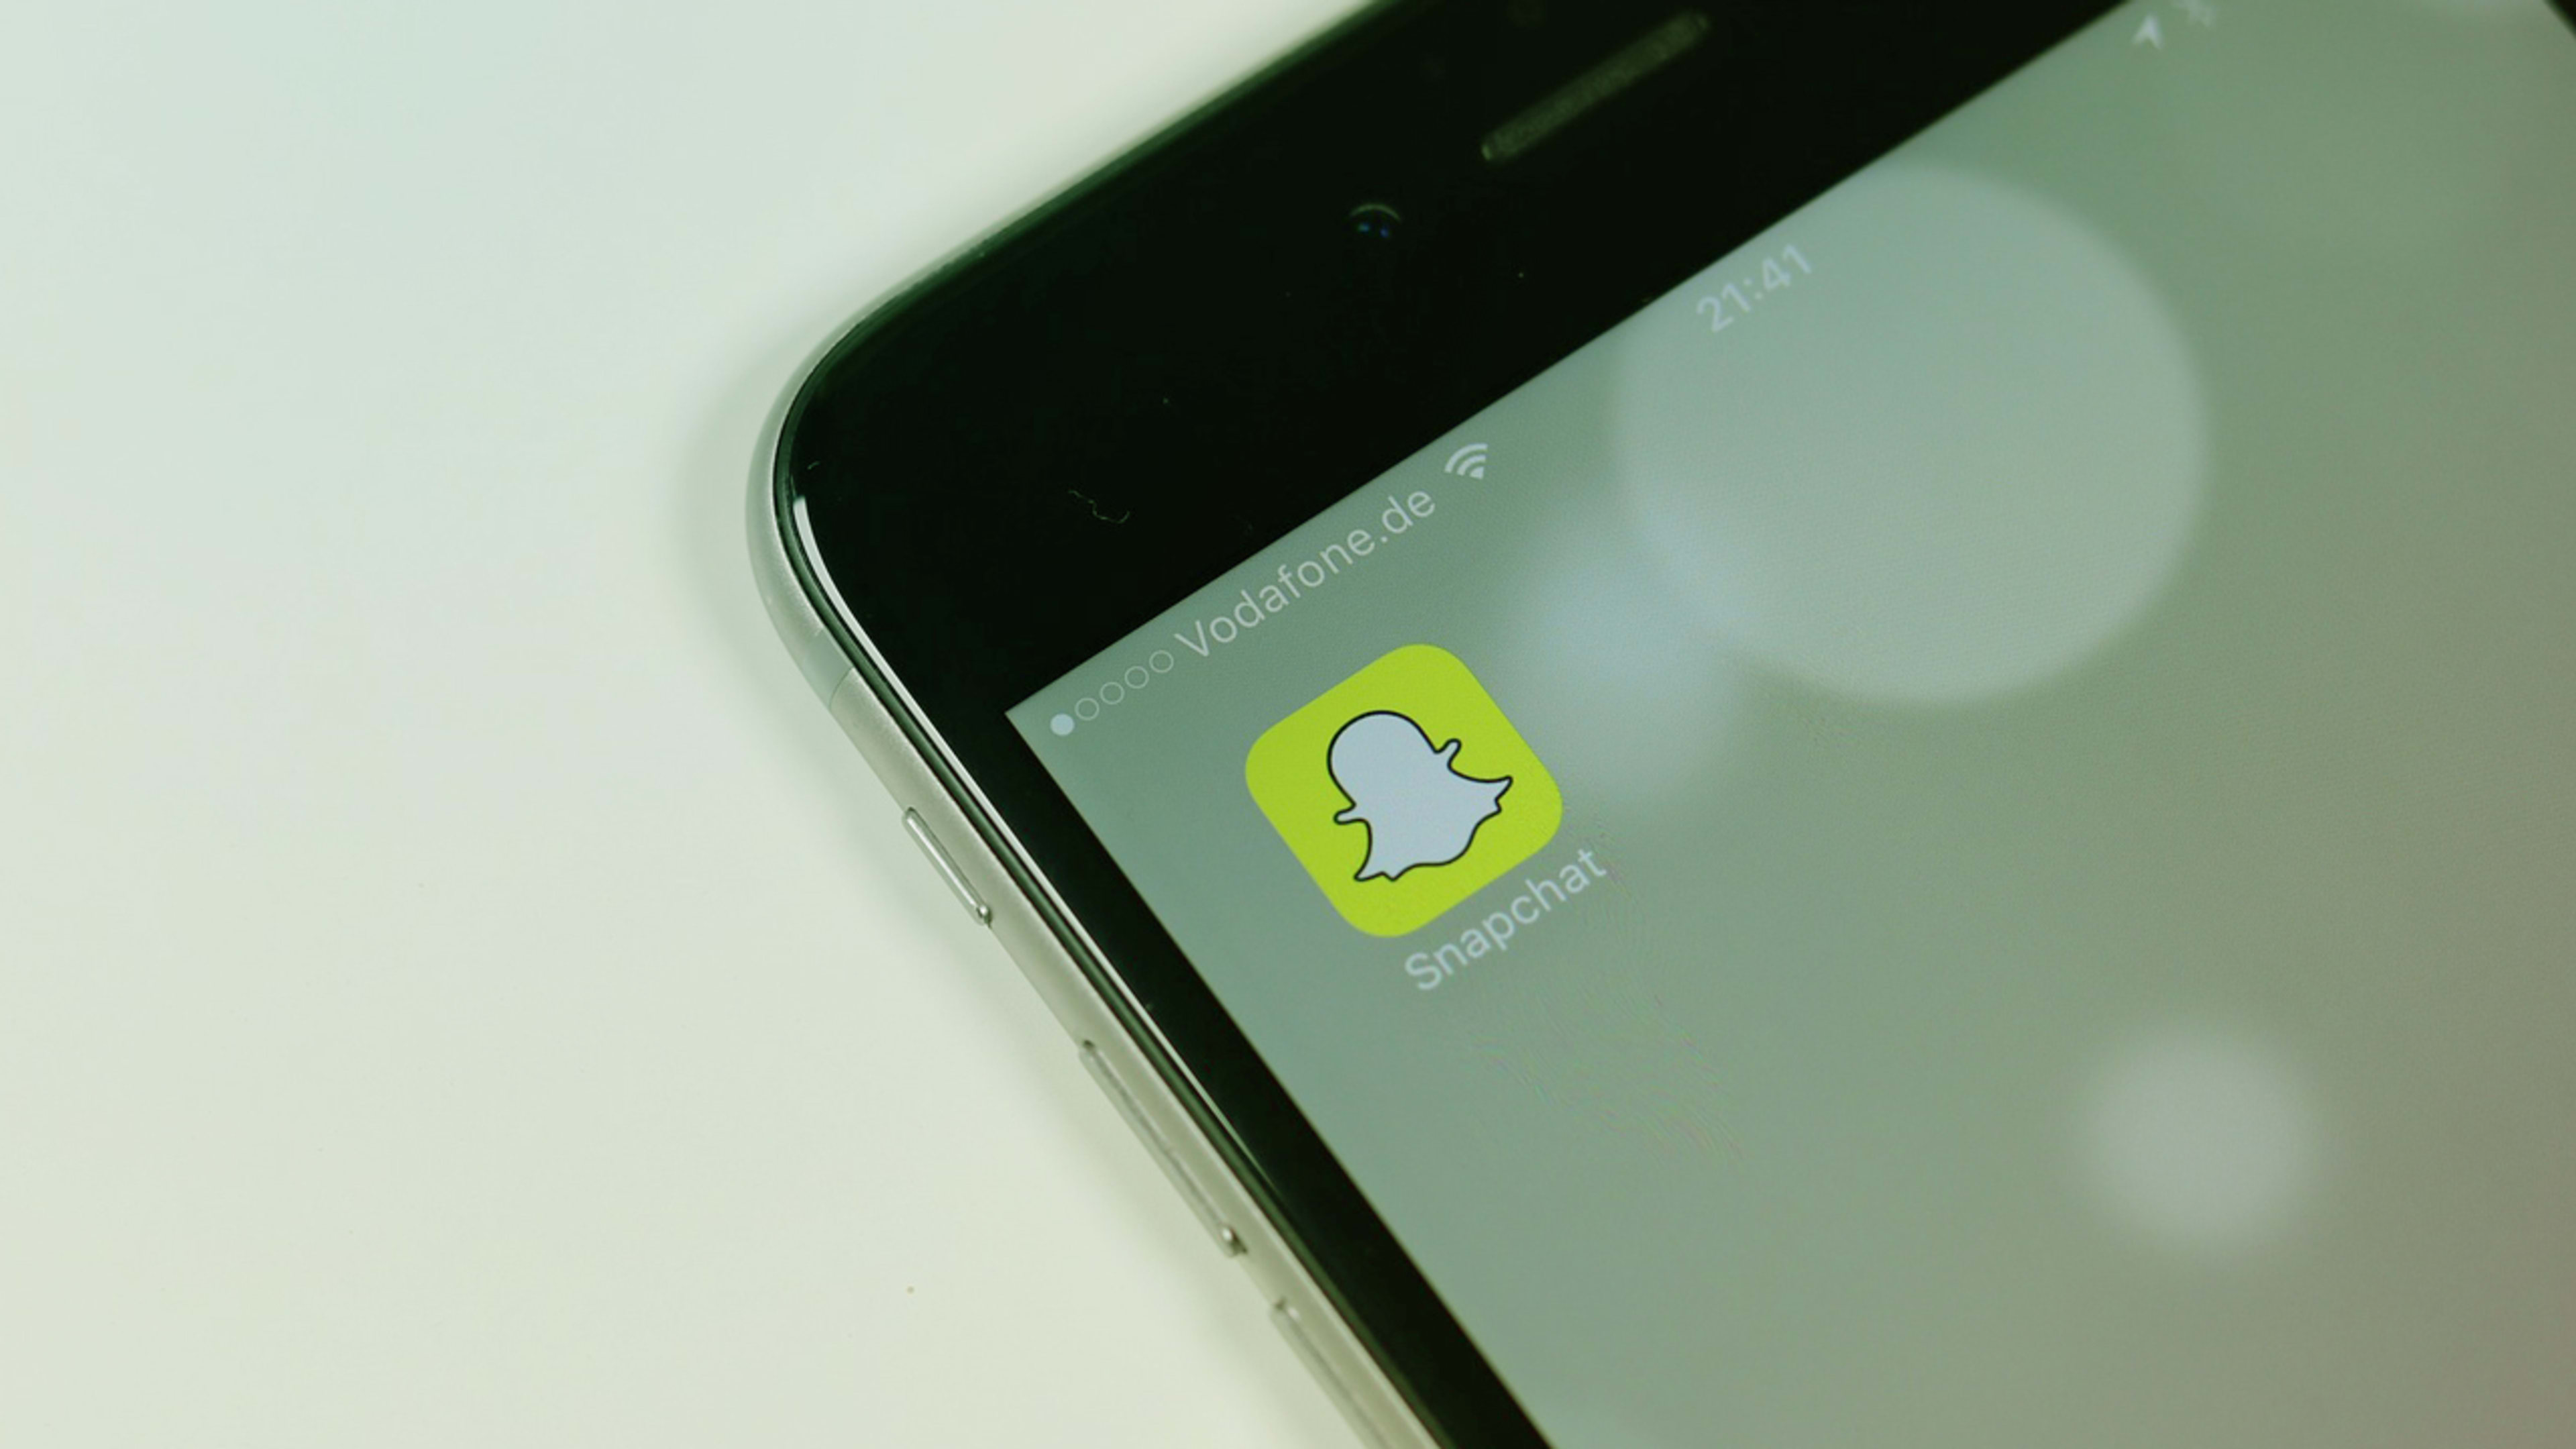 Snap’s SVP of engineering responds to claims that the company has a “toxic” and “sexist” culture